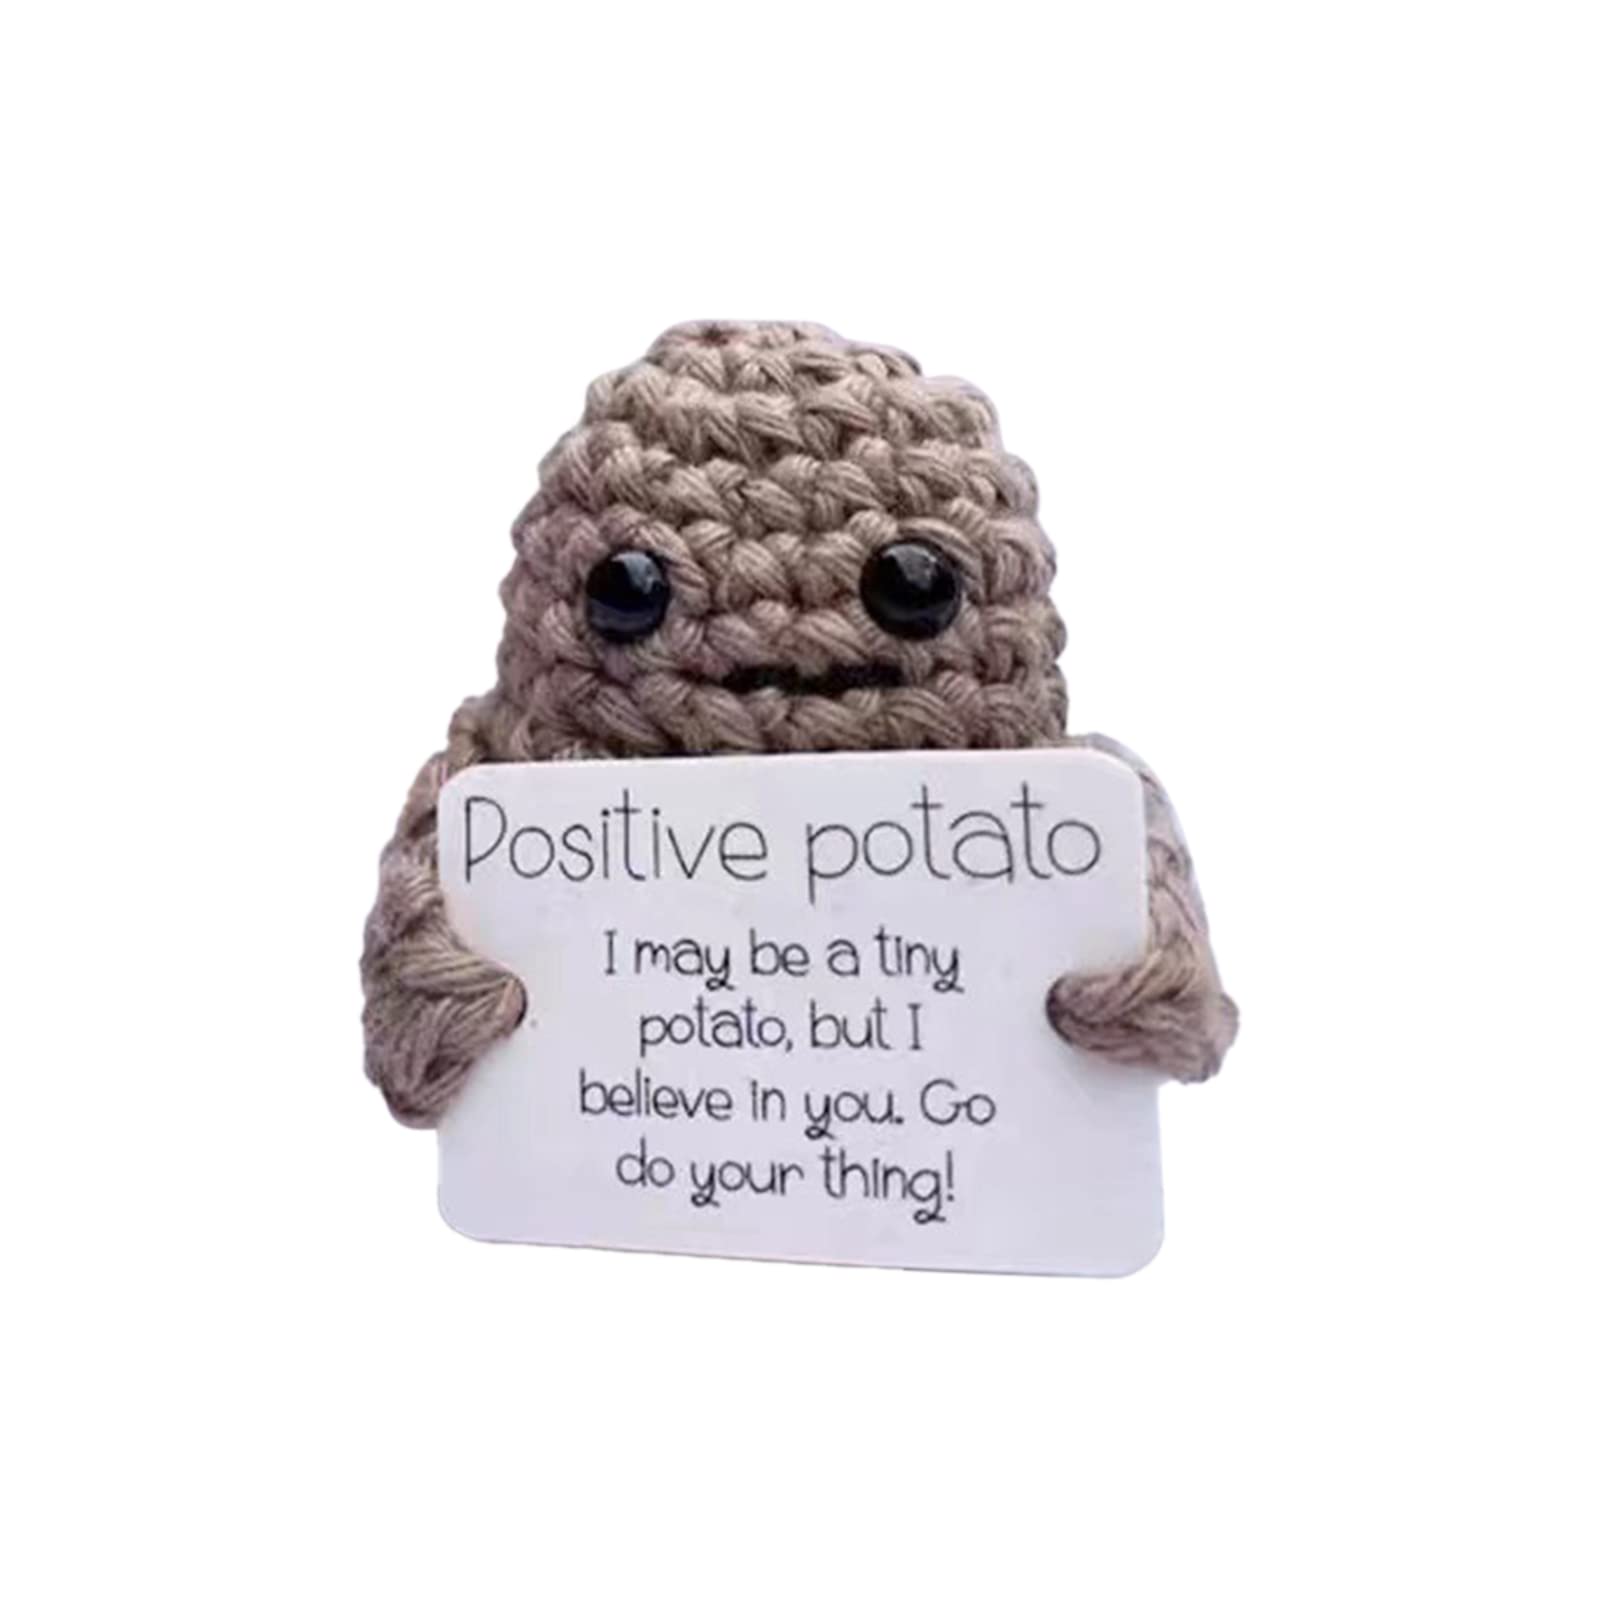 CAPRIZ Funny Positive Potato Cute Knitting Potato Doll with Positive Card Adorable Potato Toy Dolls Knitting Potato Ornaments Christmas Holiday New Year Home Office Decoration Gifts